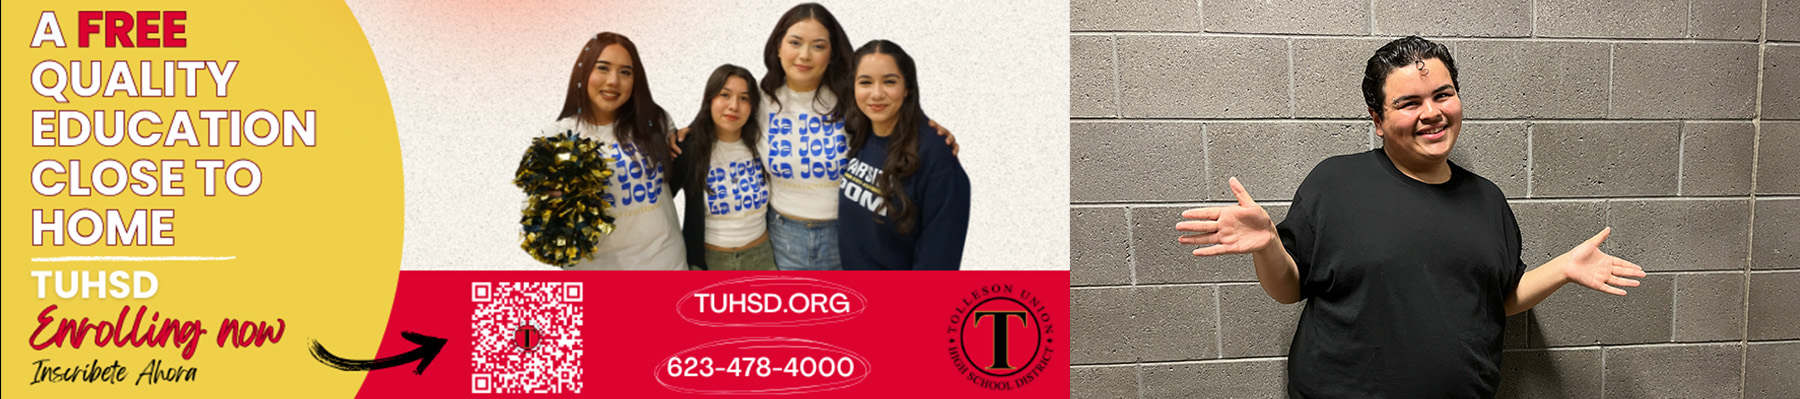 SUPPORT OUR SCHOOLS WITH A TAX CREDIT DONATION! Single person donation of $200 or married joint filing donation of $400 Remember TUHSD when you're filing your taxes! | MV-22-osprey-lecture